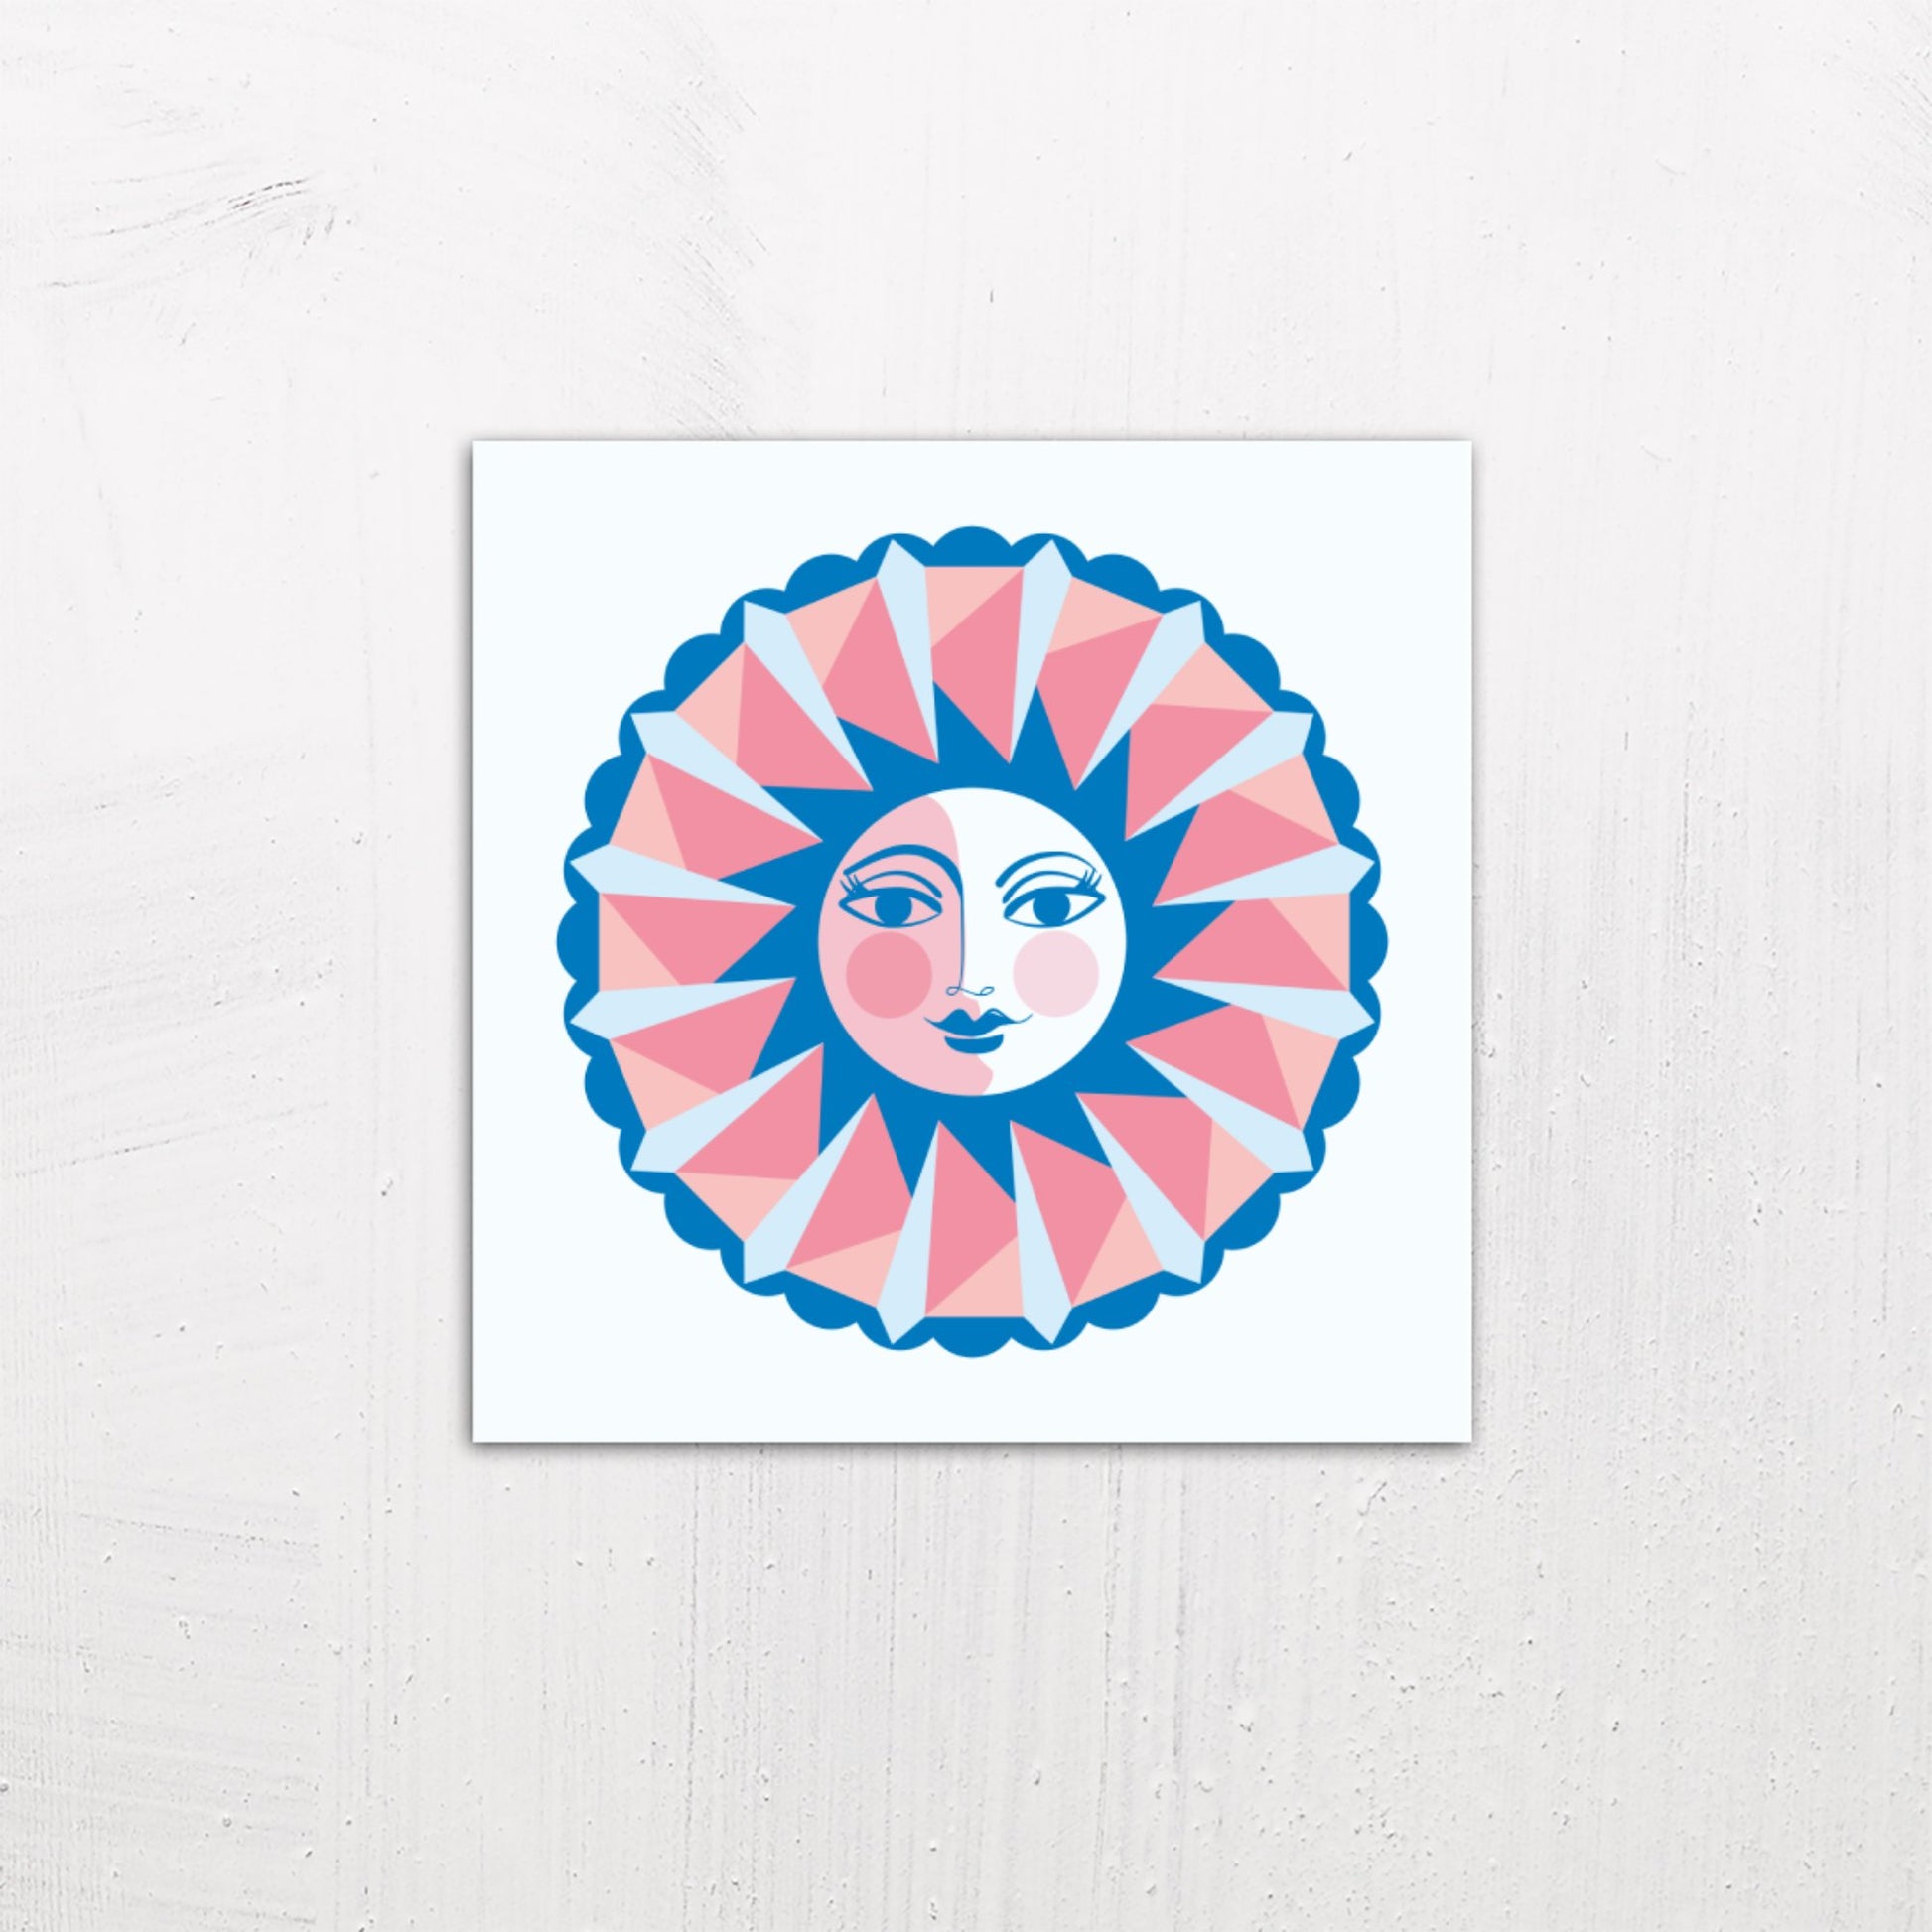 A medium size metal art poster display plate with printed design of a Sun Face Design